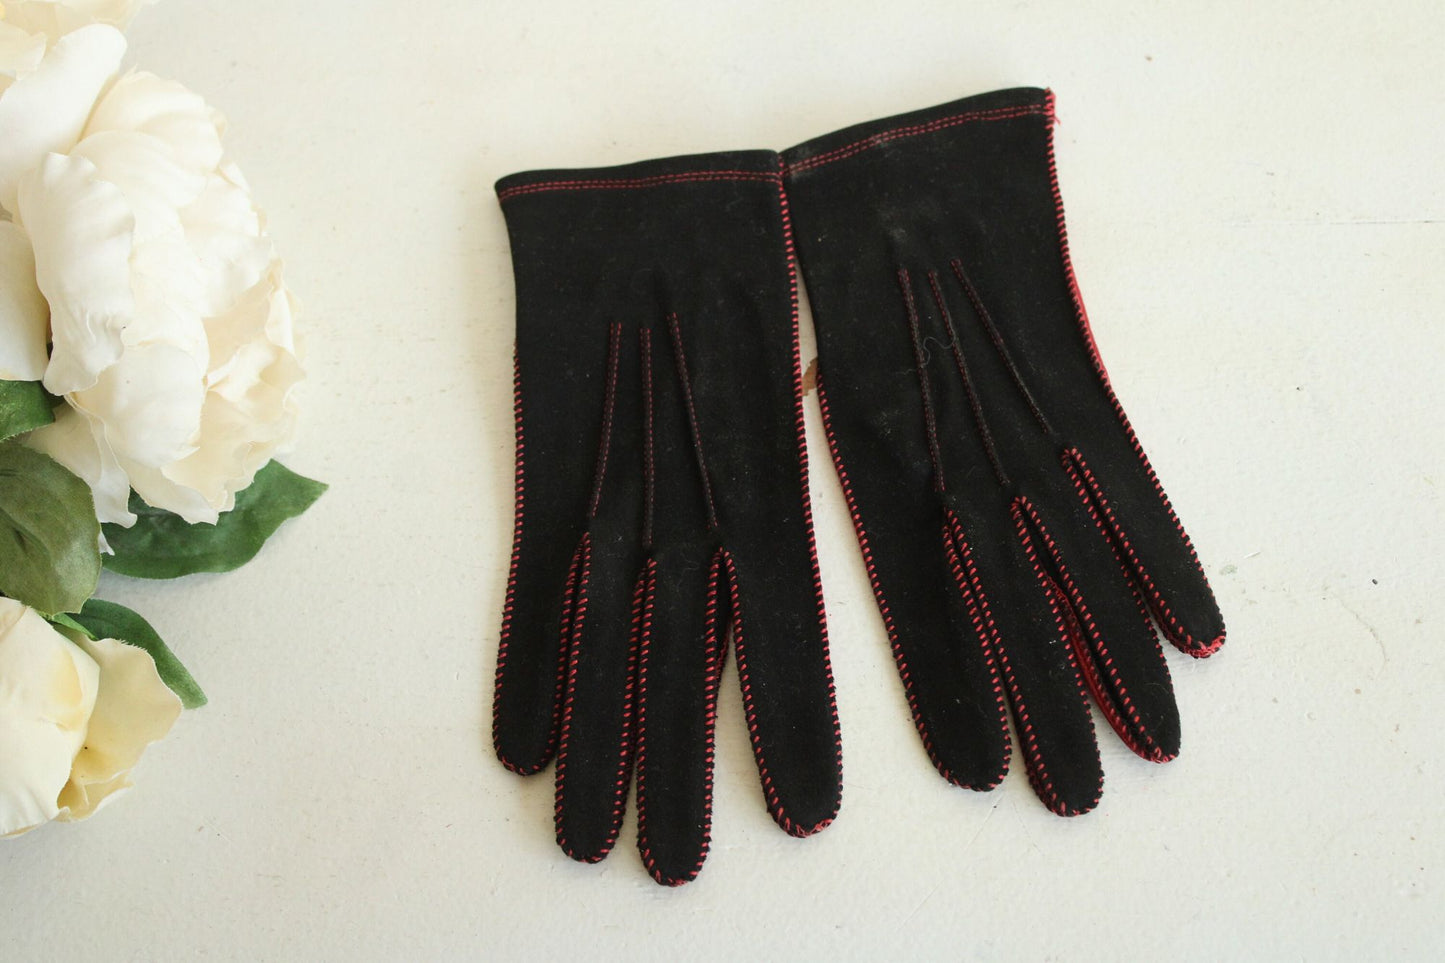 Vintage 1950s 1960s Leather Gloves by Lilly Dache Size 7